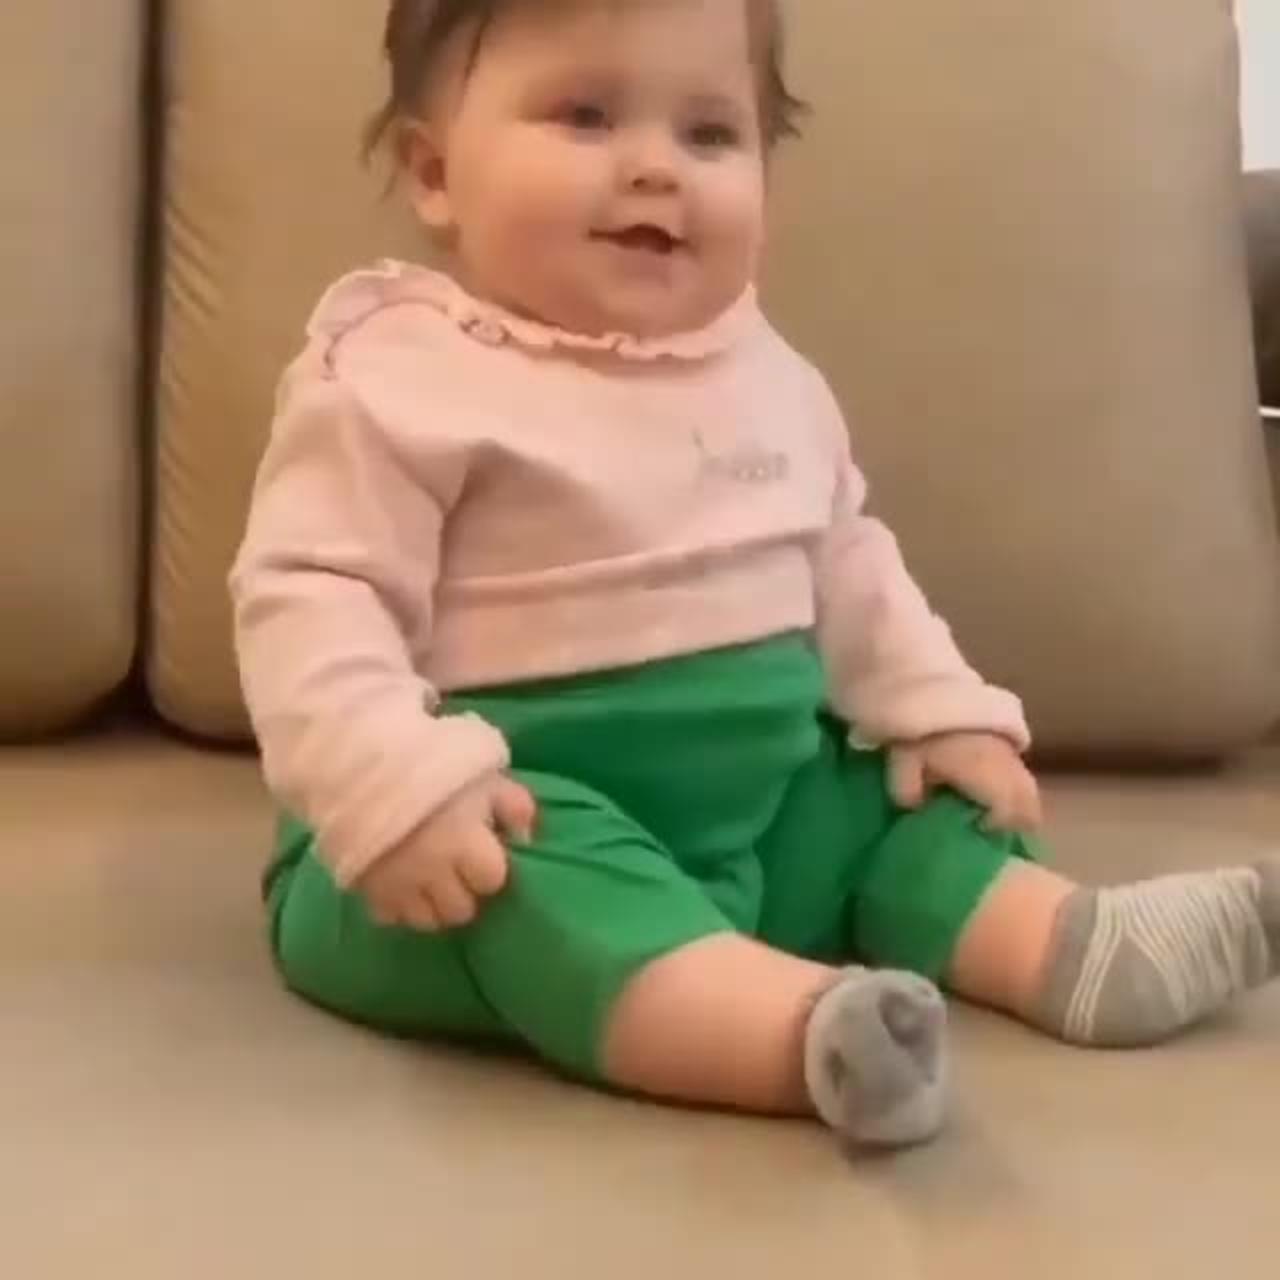 Very cute baby Laughing